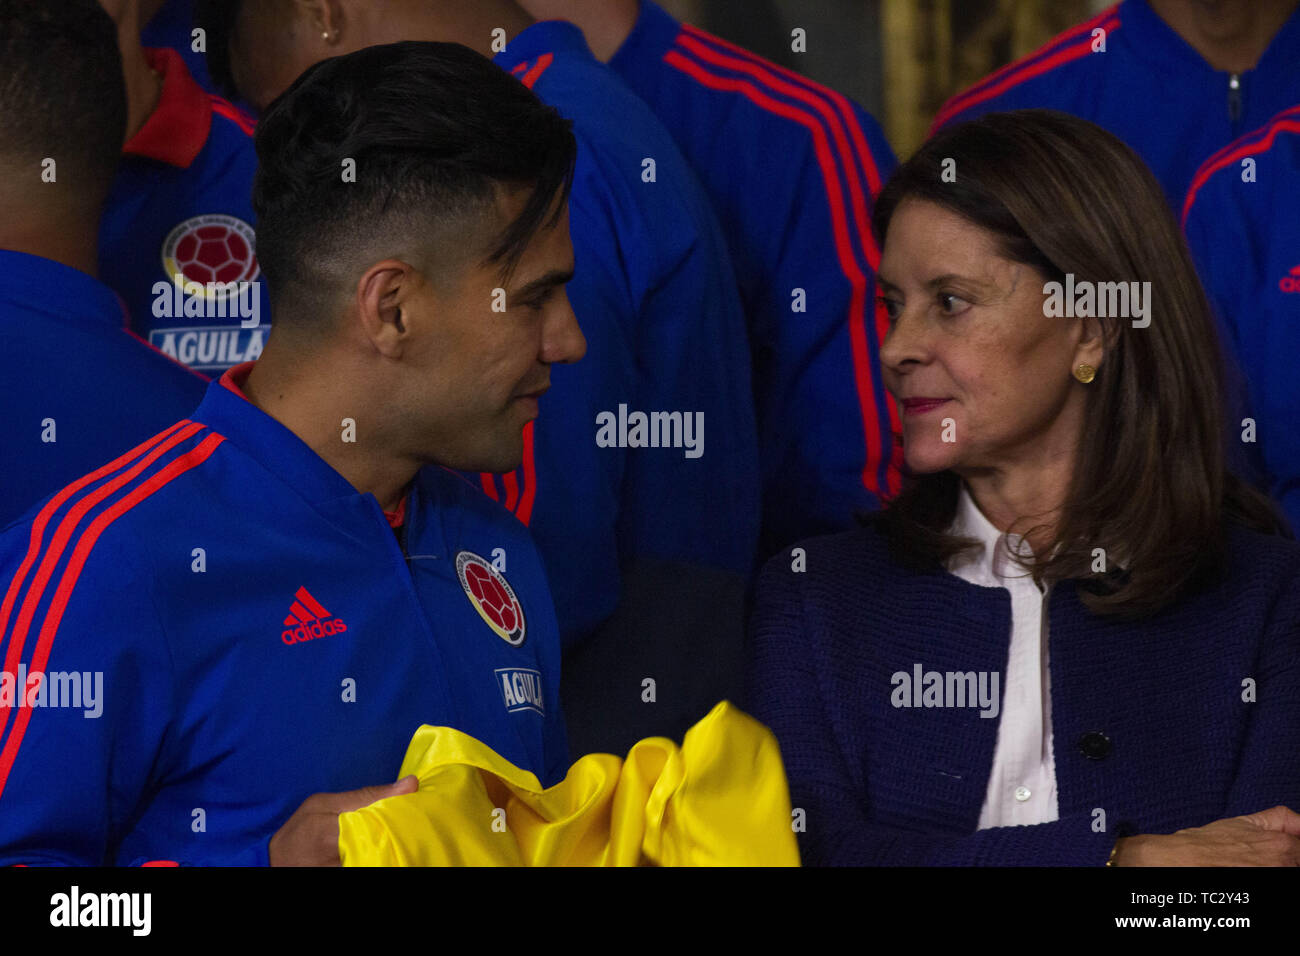 June 4, 2019 - Radamel Falcao (L) and Vice President Marta Lucia RamÃ-rez (R) at the ceremony at the Casa de NariÃ±o with the Colombia National Team that received the National Pavilion from the hands of President IvÃ¡n Duque. Credit: Daniel Garzon Herazo/ZUMA Wire/Alamy Live News Stock Photo